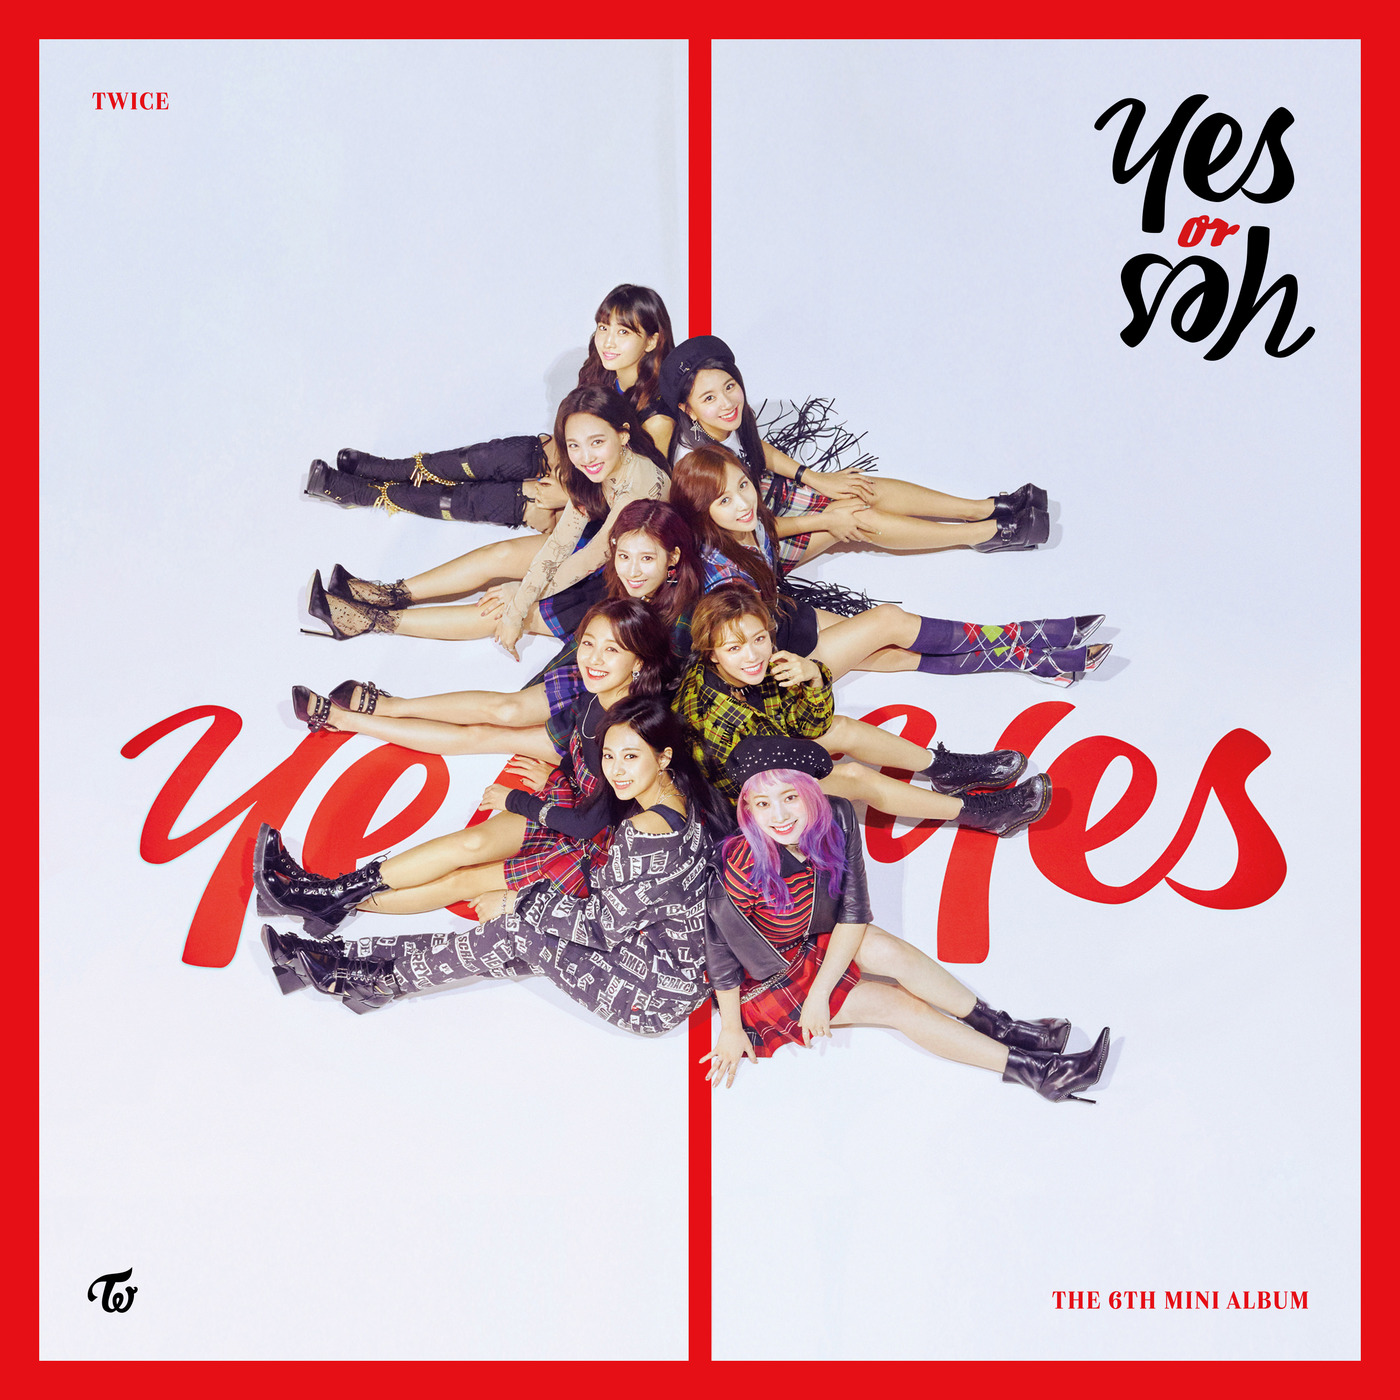 According to Japan Oricon News on March 13, TWICEs mini 6th album YES or YES, which was released on May 5, won about 33,000 points on the Oricon Weekly album chart and won the first placeand TWICE is the first Korean album to be released locally, not the original album released locally.It attracted attention by recording.Recently, TWICE has released the first place on the top 100 charts of local line music, all seven tracks of the new album YES or YESIt has shown the power of chart line to rank from 7th to 7th.As a result, TWICE reached the top of the Oricon Weekly album chart with Japans first regular album BDZ released in September, and the first place on the chart with the mini 6th album YES or YES in two months.It solidified the status of Asia One Top Girl Group.In particular, TWICE has set a record for Oricon Weekly singles and album charts in six years as an overseas artifact artist with local album BDZ.The record of 89,721 points set only on the day of the release of the album was the highest record among the K-pop girl groups that have entered Japan since 2008 when the Oricon Daily Album Chart ranking began to be released.BDZ has also been certified platinum by the Japan Records Association and continued to the 5th consecutive platinum march.In addition, TWICE is expected to hold a dome tour for the first time in the K-pop girl group in Japan next year and show off the dignity of Asias strongest girl group.On the other hand, YES or YES, which TWICE introduced for the 10th time in Korea, is a song with a cute confession that you only have to answer because the answer is YES.The exciting and youthful rhythm combines dynamic sound to create addictiveness.The YES or YES music video, which captures the charm of 9-color 9-color members and powerful choreography, is also popular.Forbes said, TWICE recorded 31.4 million views in 24 hours of MV release, which is the seventh largest in the world.The MV exceeded 59.31 million YouTube views at 8 am on March 13, and turned on a green light for 10 consecutive MV 100 million views.